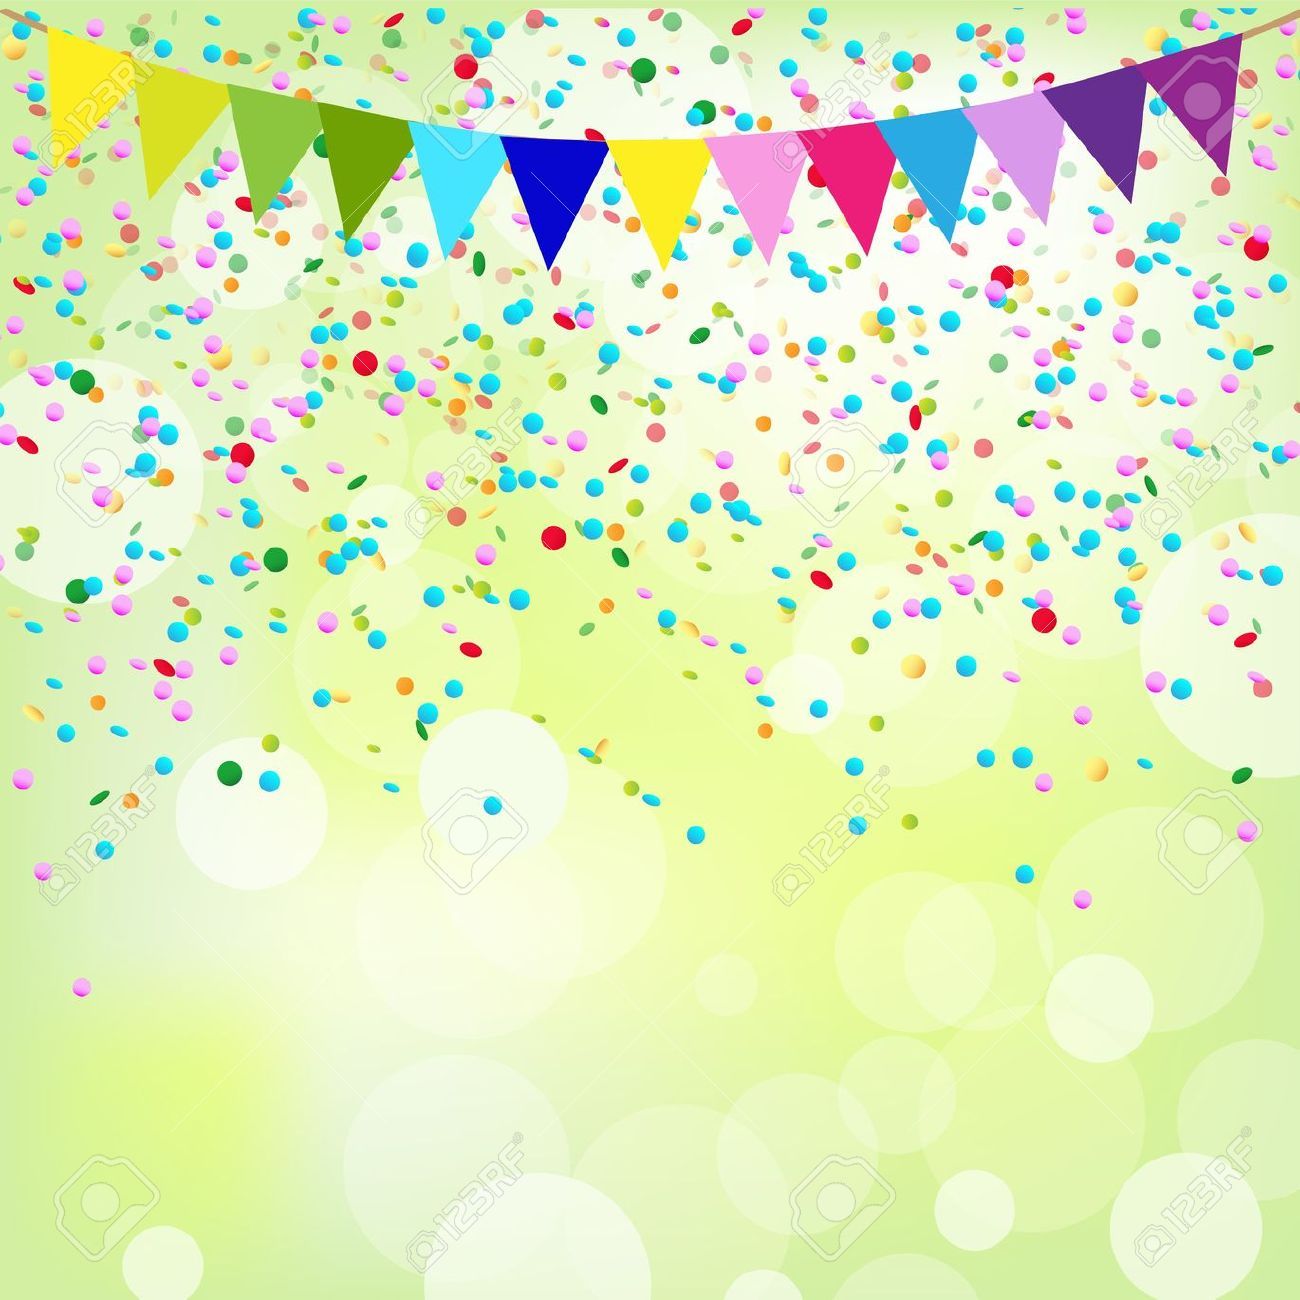 Background Party Image Google Search Phone Desktop